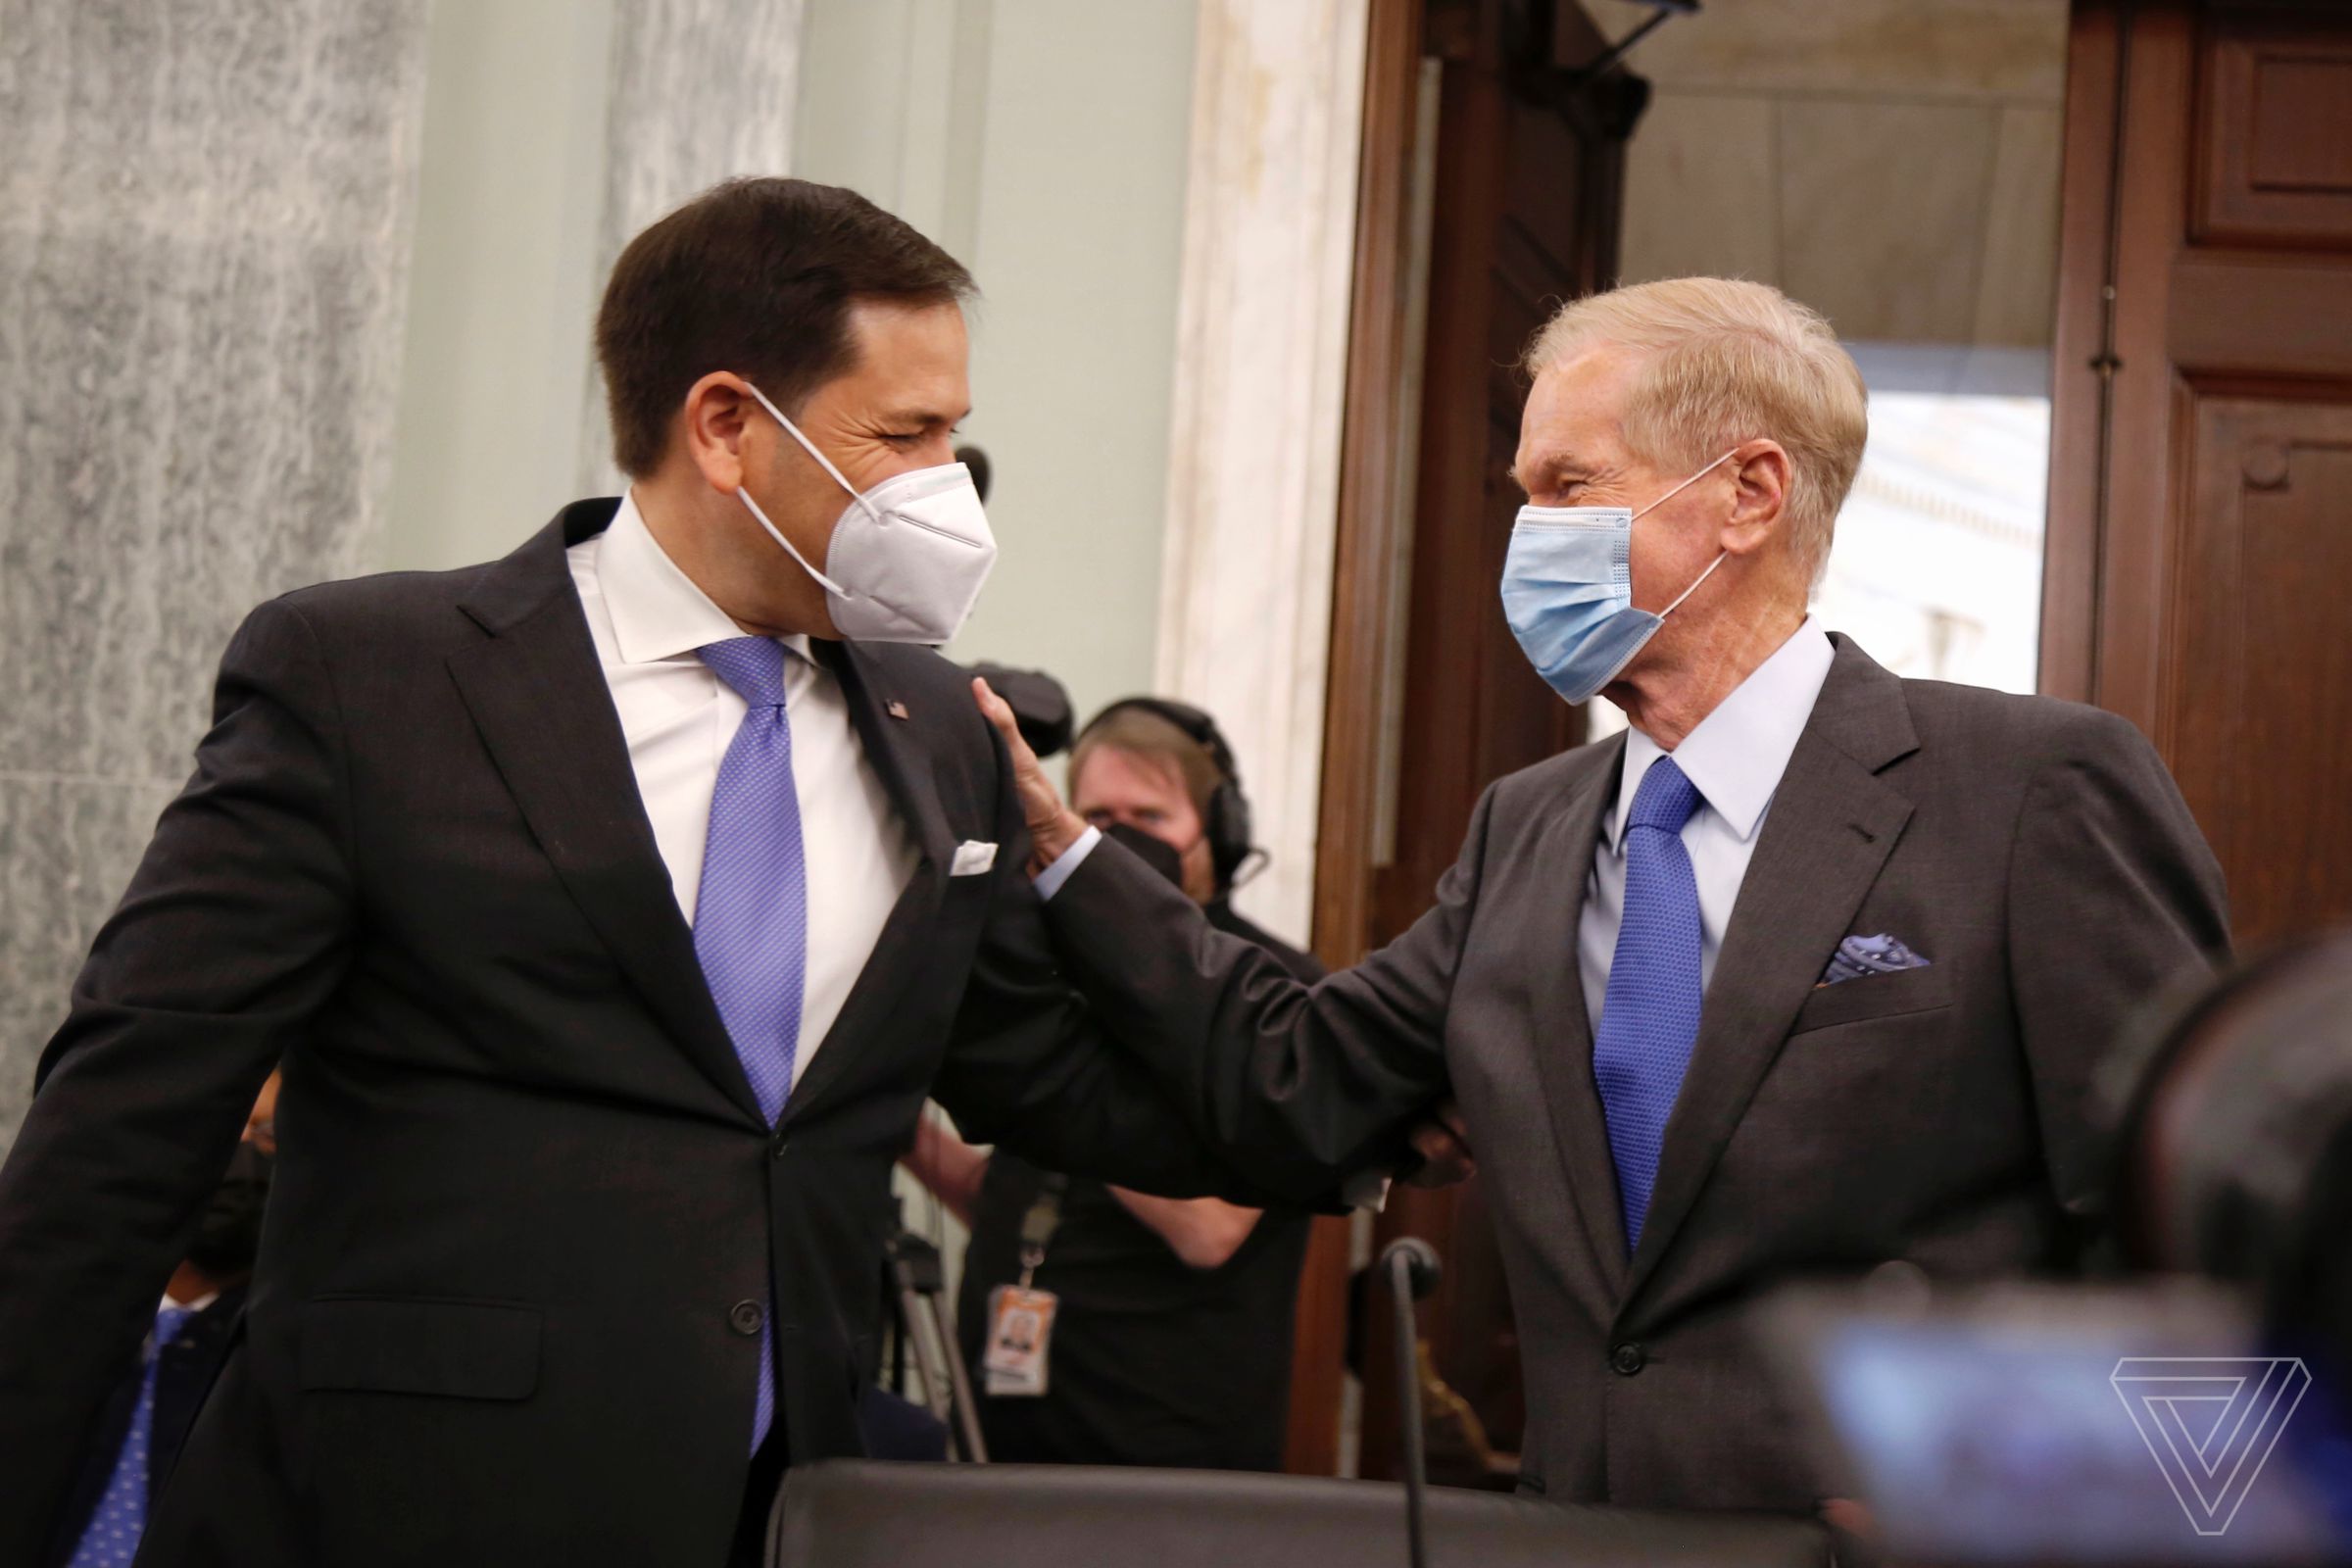 Before his Senate confirmation hearing to be NASA administrator, Bill Nelson greets Sen. Marco Rubio (R-FL), Nelson’s former colleague in the Senate and the first Republican to endorse Nelson’s nomination.